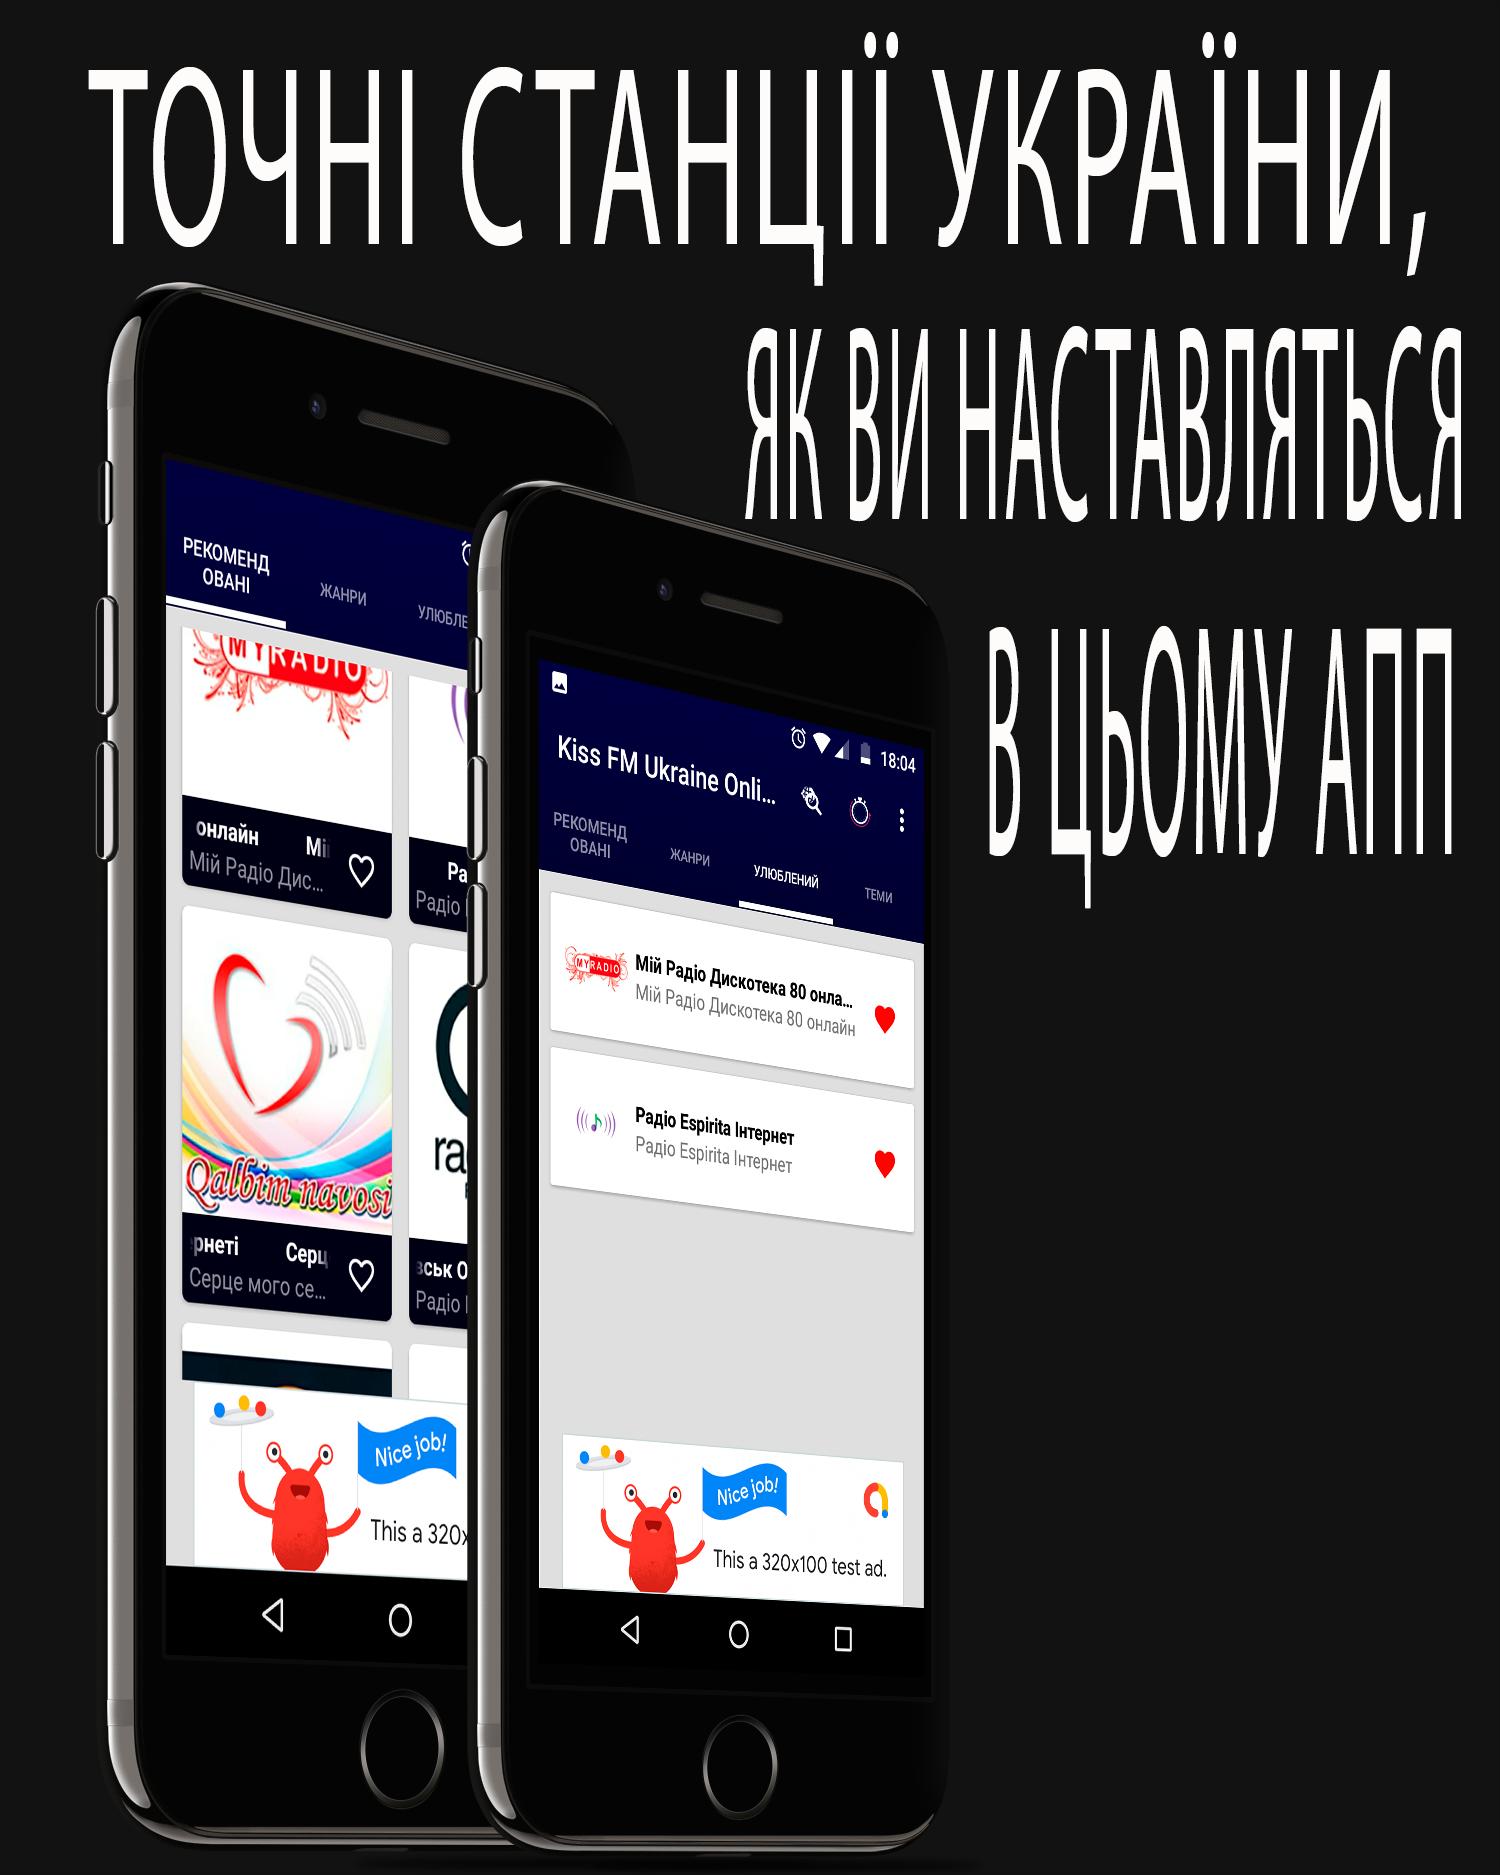 Radio Shanson Online for Android - APK Download